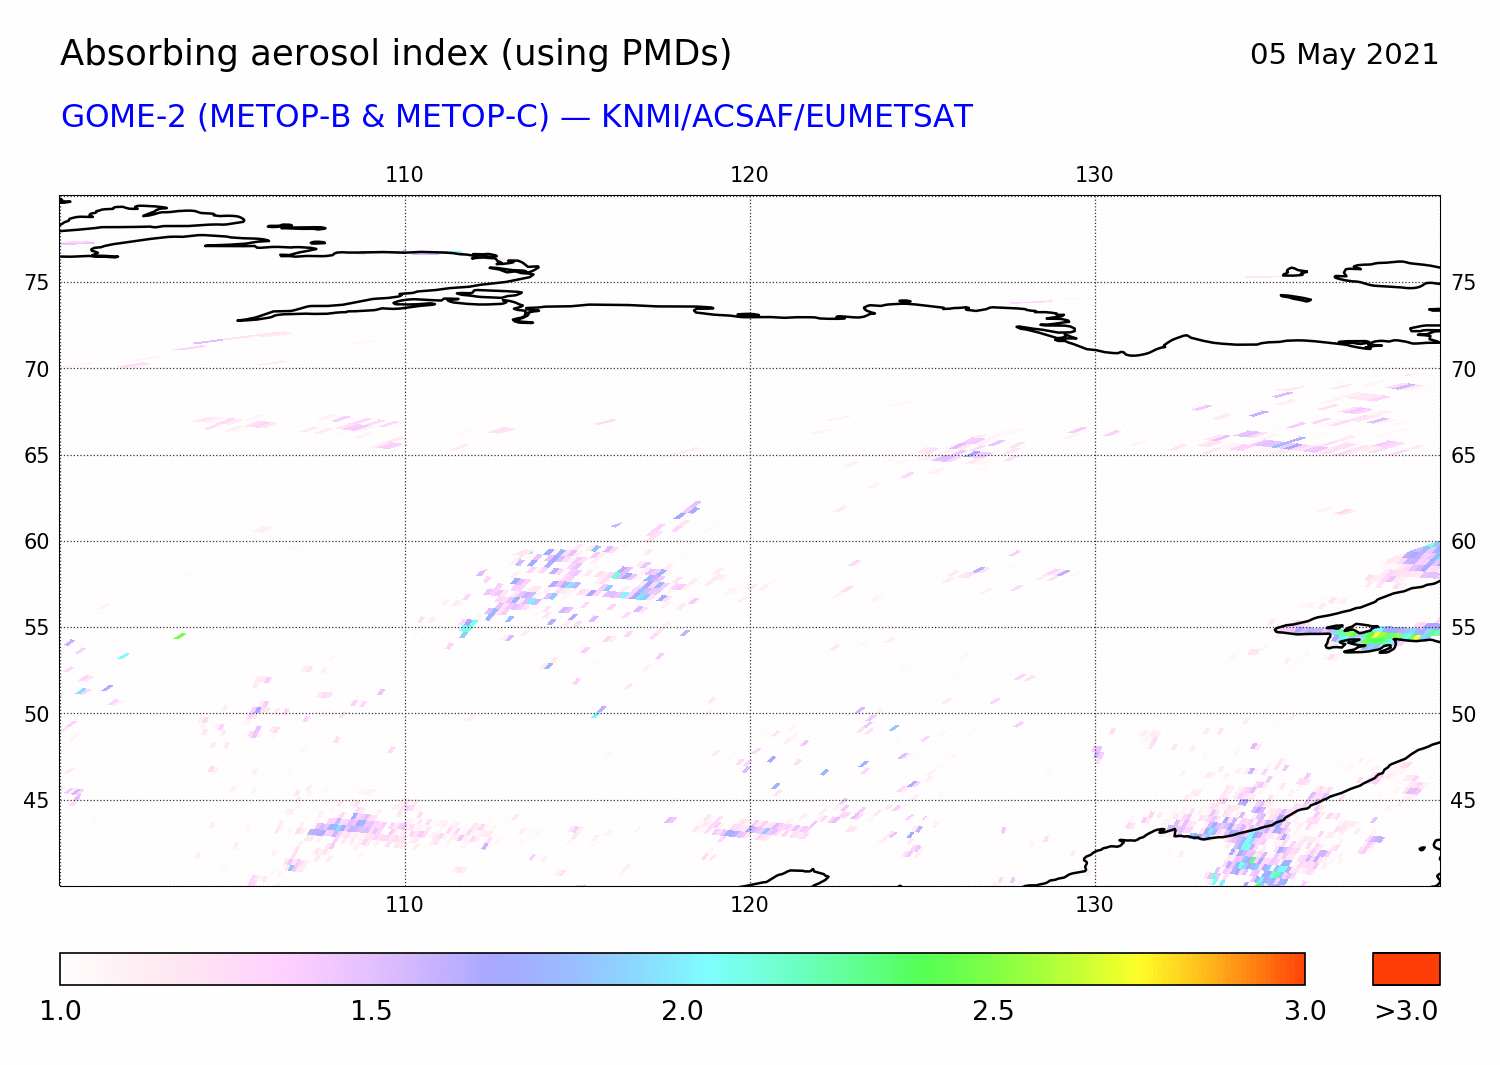 GOME-2 - Absorbing aerosol index of 05 May 2021